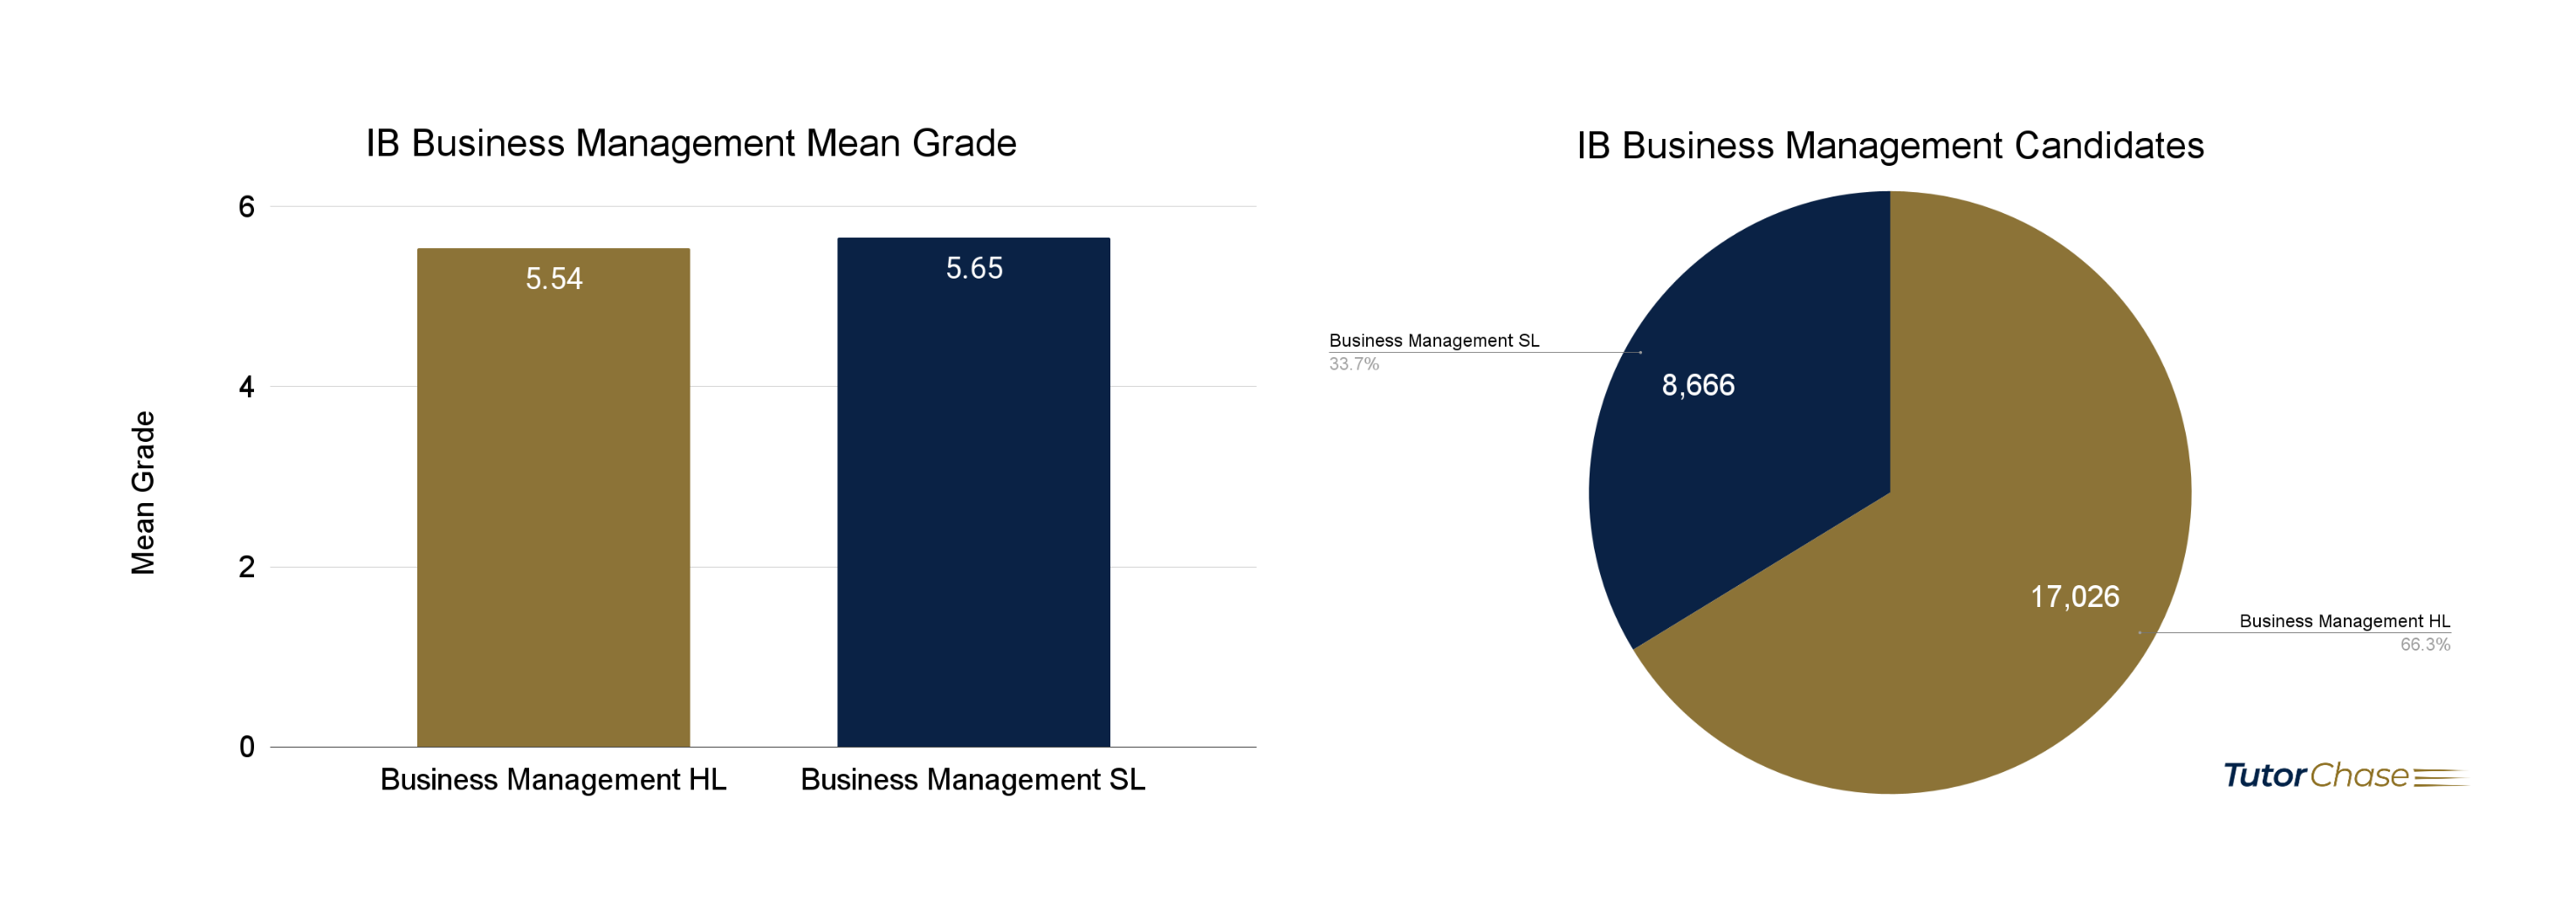 IB Business Management SL & HL mean grades and number of candidates in 2021